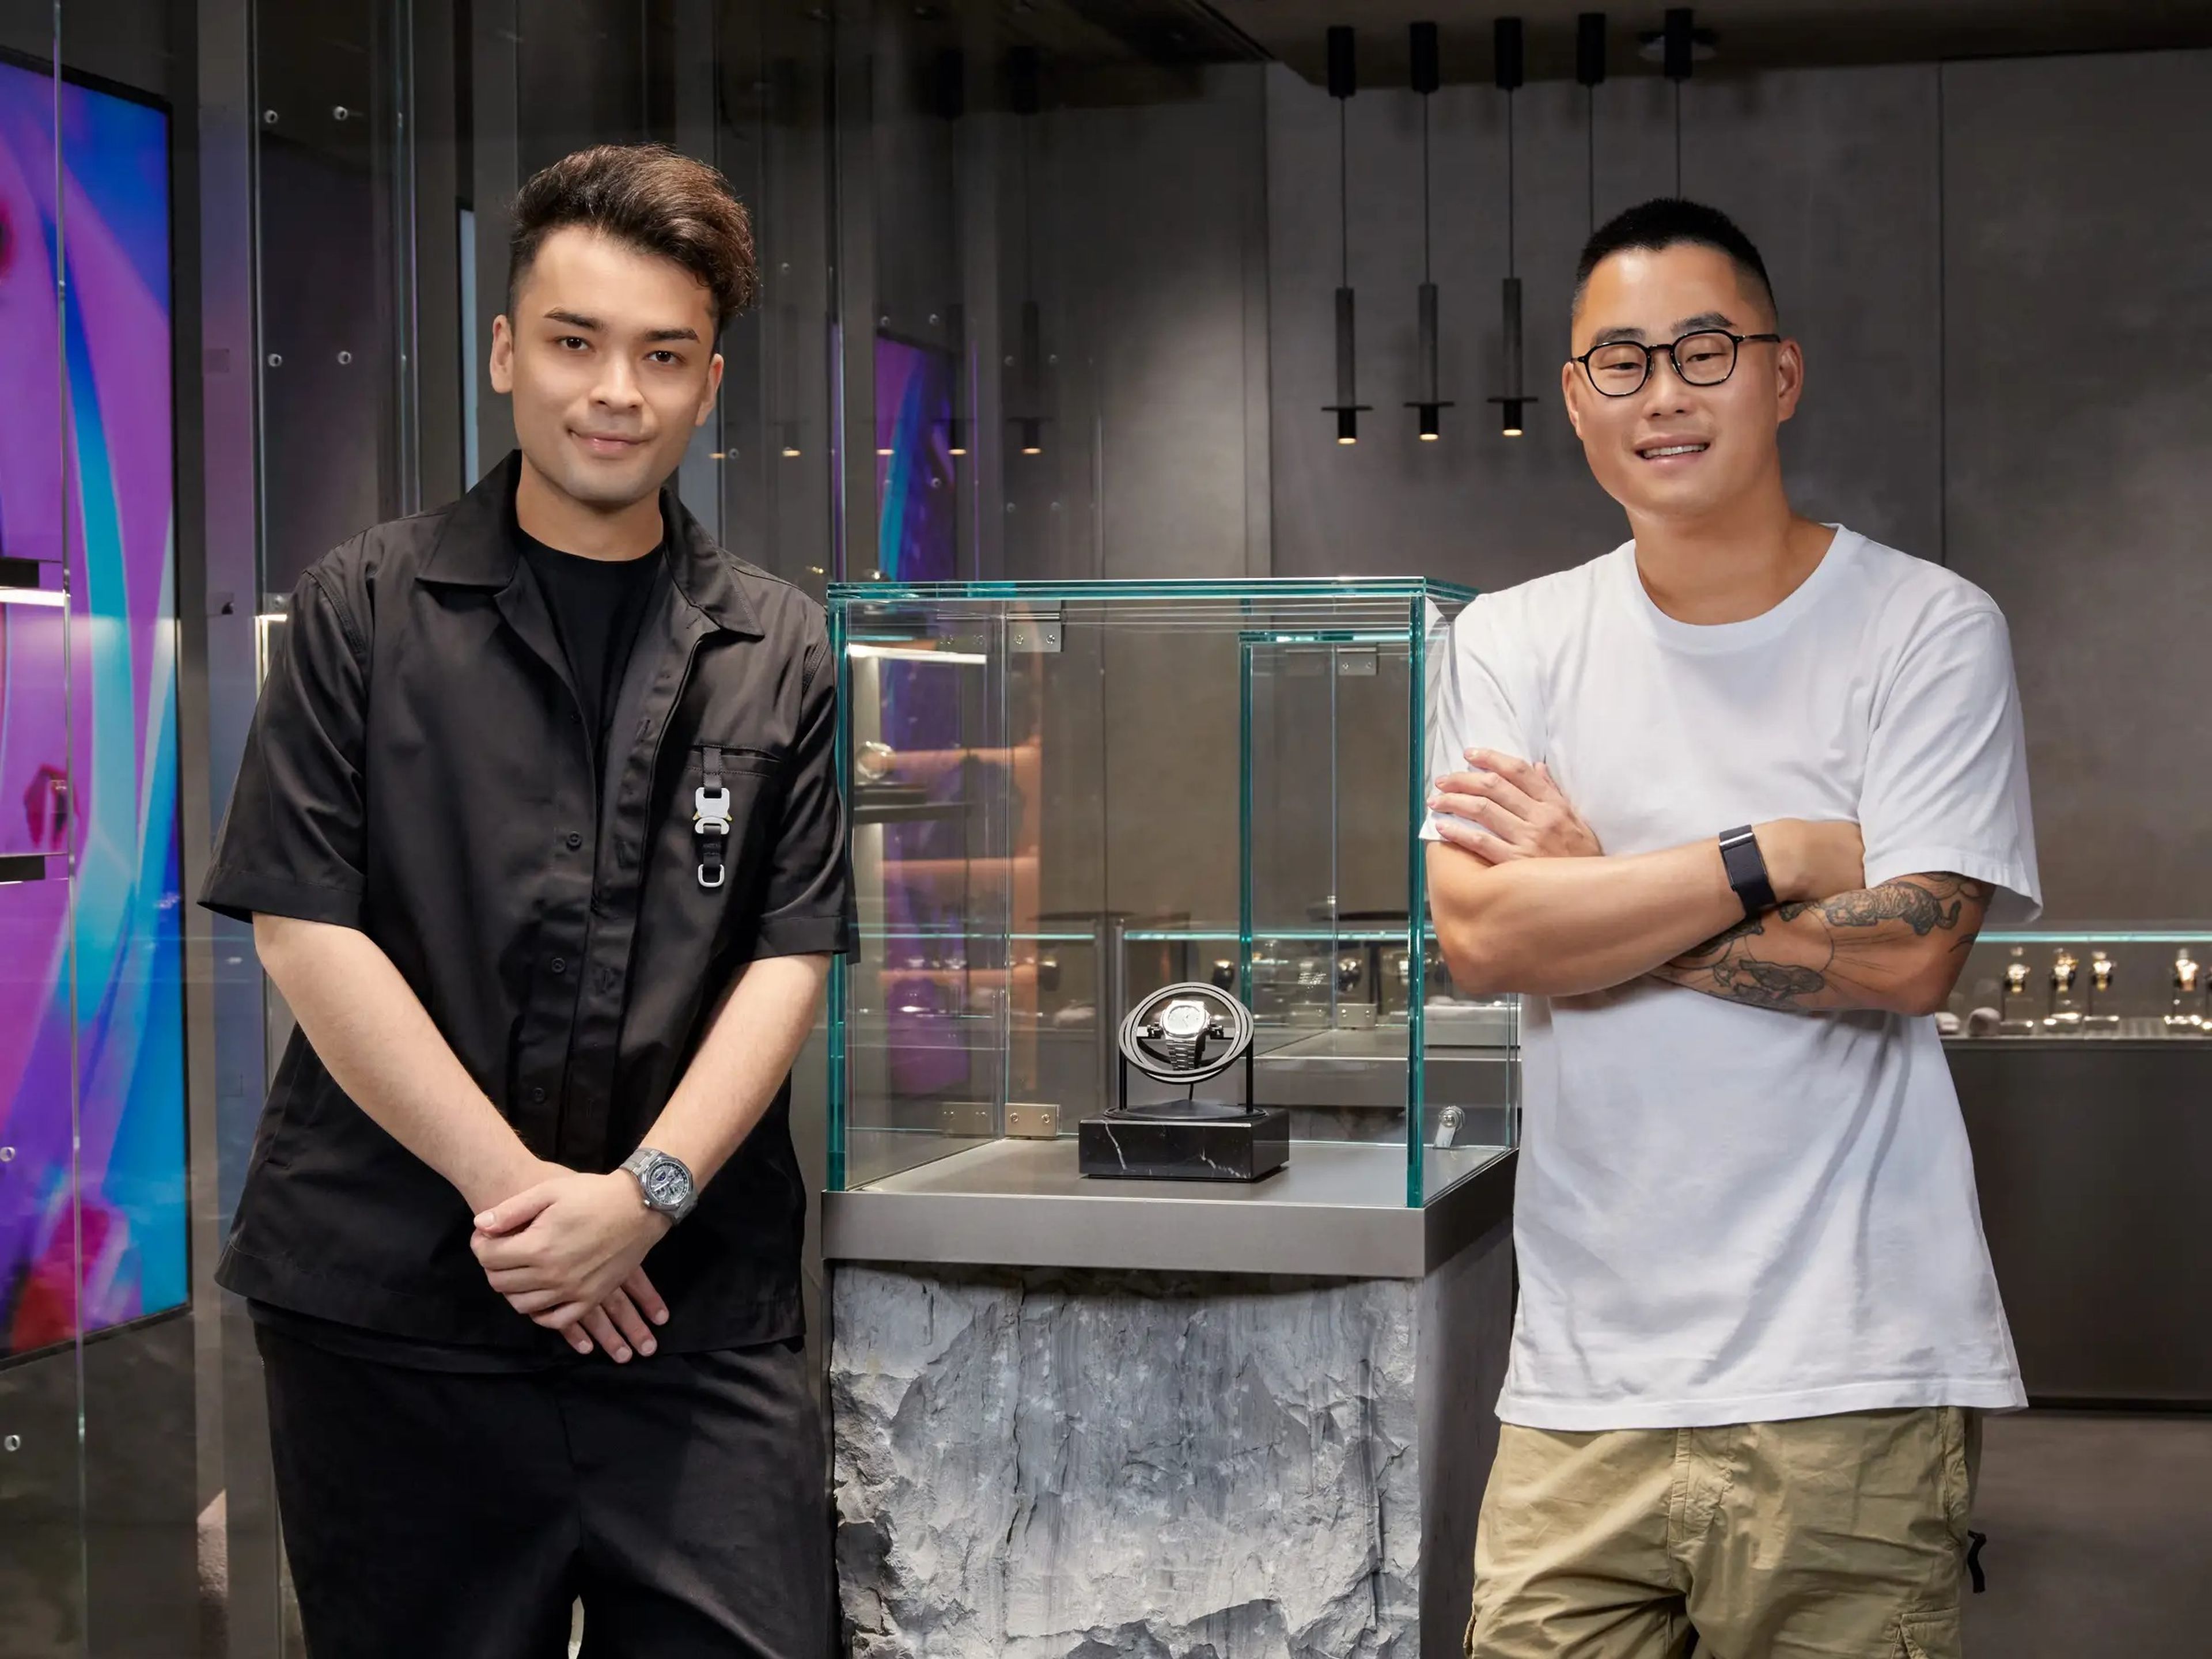 Austen Chu and Sean Wong stand next to a watch in a glass case